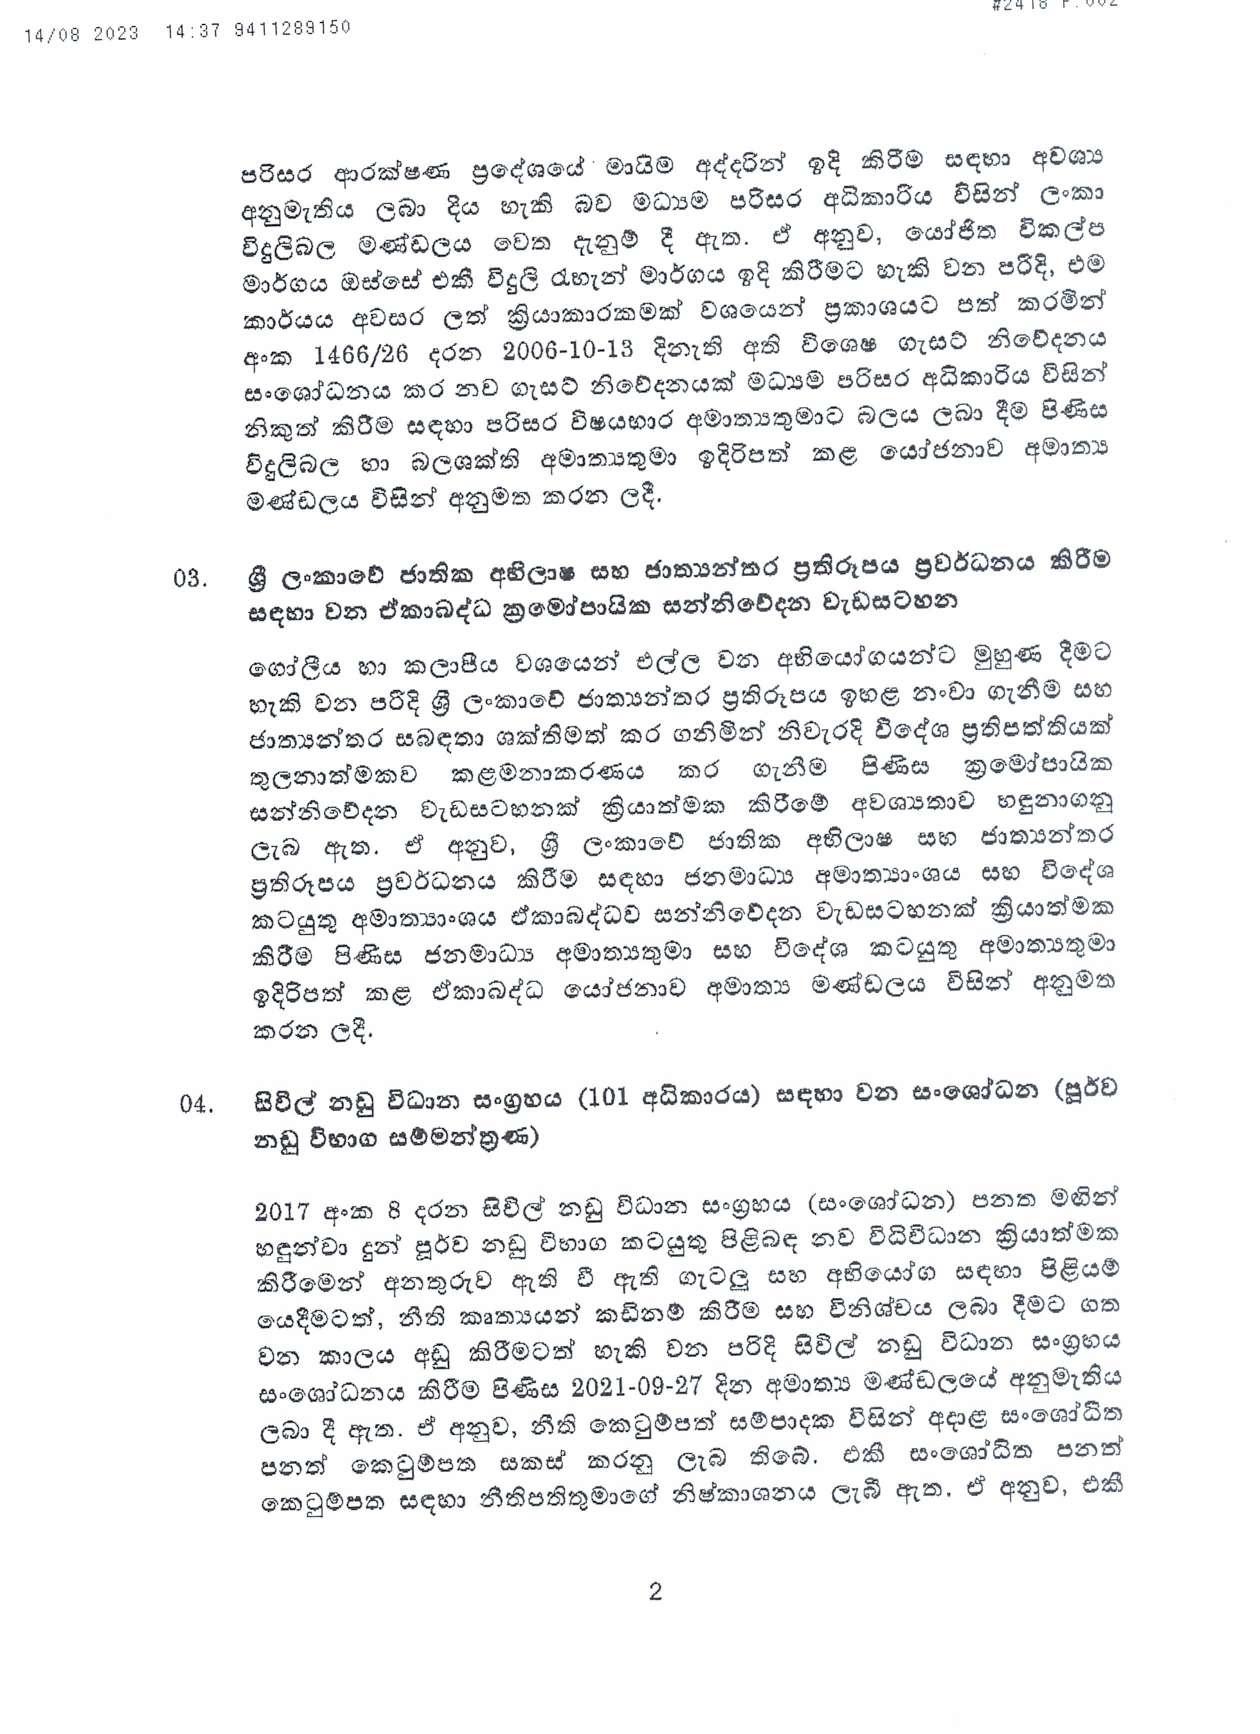 Cabinet Decision on 14.08.2023 page 002